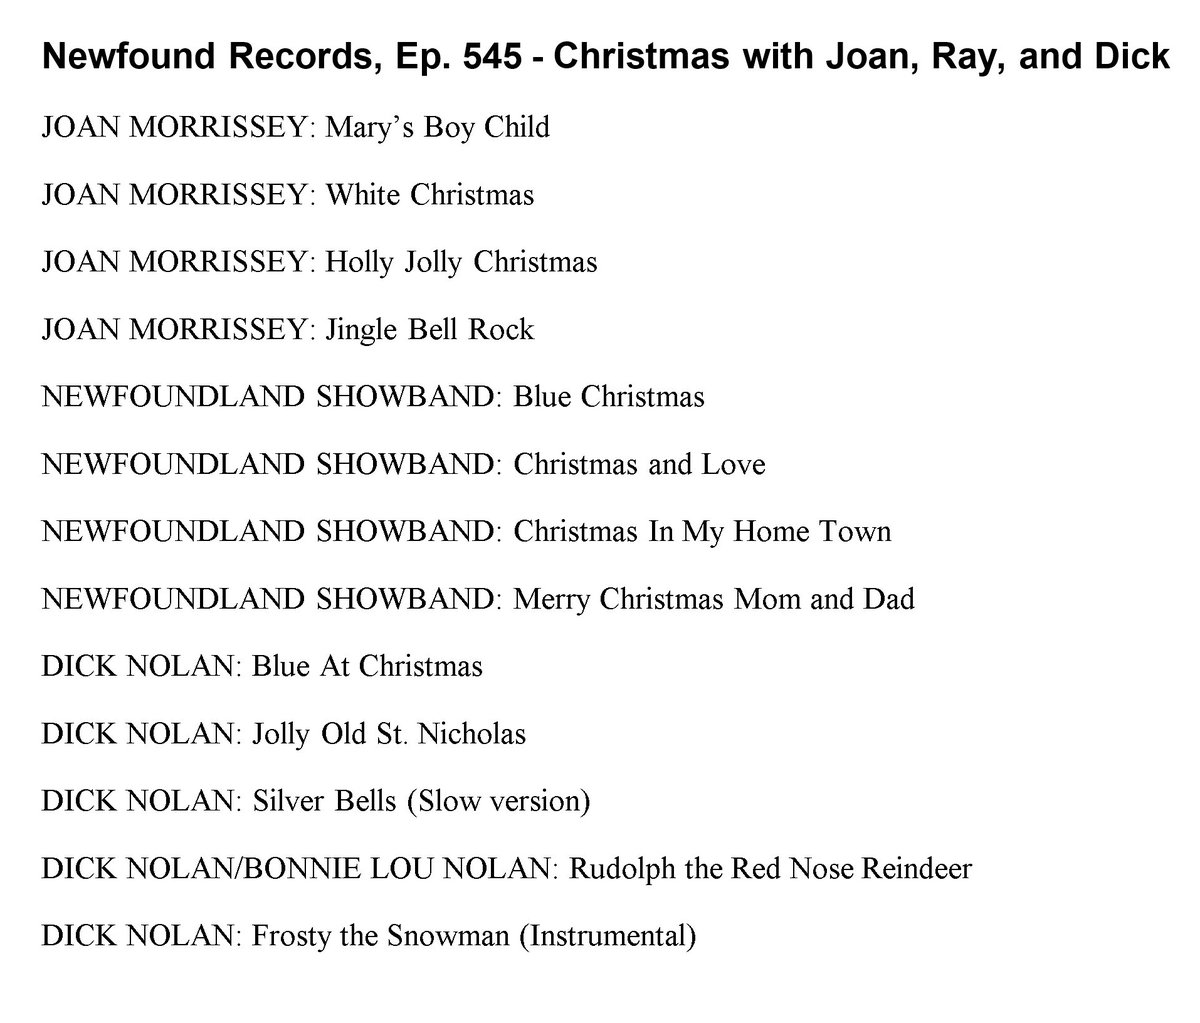 Today, a COUNTRY CHRISTMAS with JOAN MORRISSEY, RAY MCLEAN & THE NF SHOWBAND, & DICK NOLAN.

NOON NT on CHMR 93.5 FM & chmr.ca

@chmrmunradio @CampbellCritch @SpencerinNL @SeanWMurray @NLLiveEvents #CountryChristmas @tomcmorrissey @hurtinforreal @joechurchill